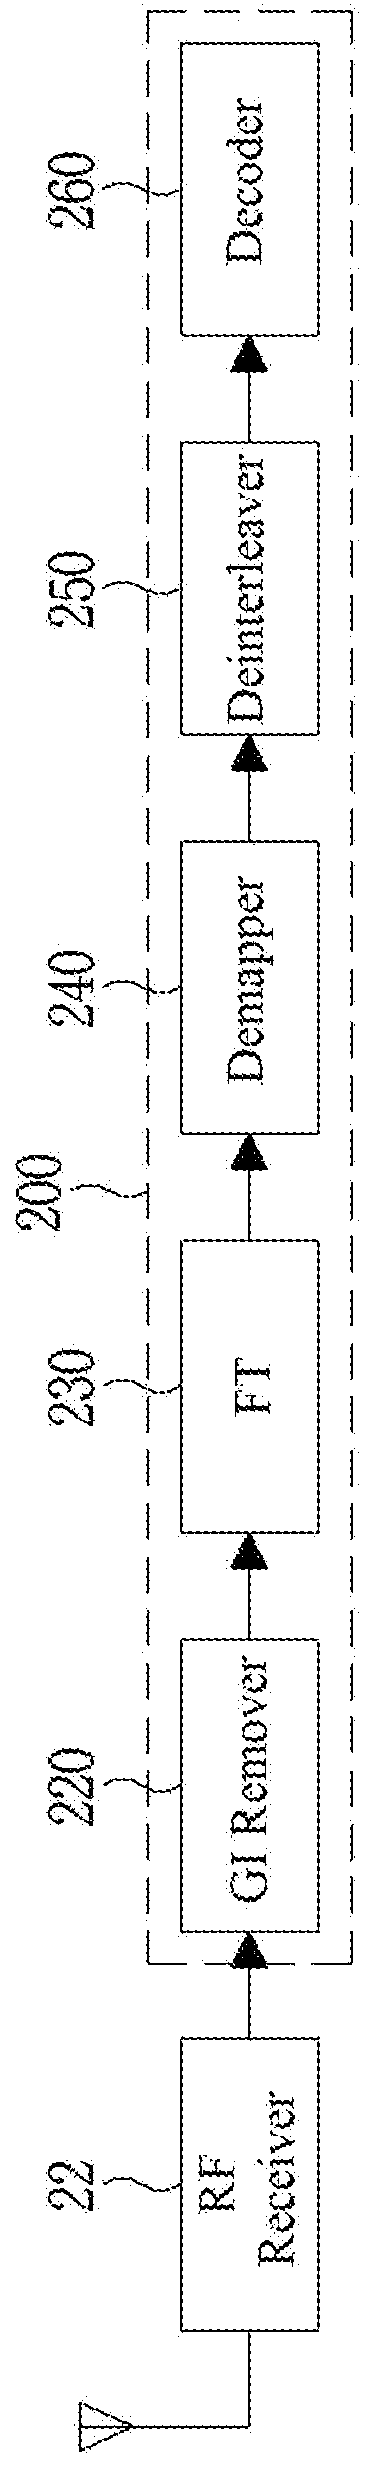 Physical layer protocol data unit format applied with space time block coding in a high efficiency wireless LAN